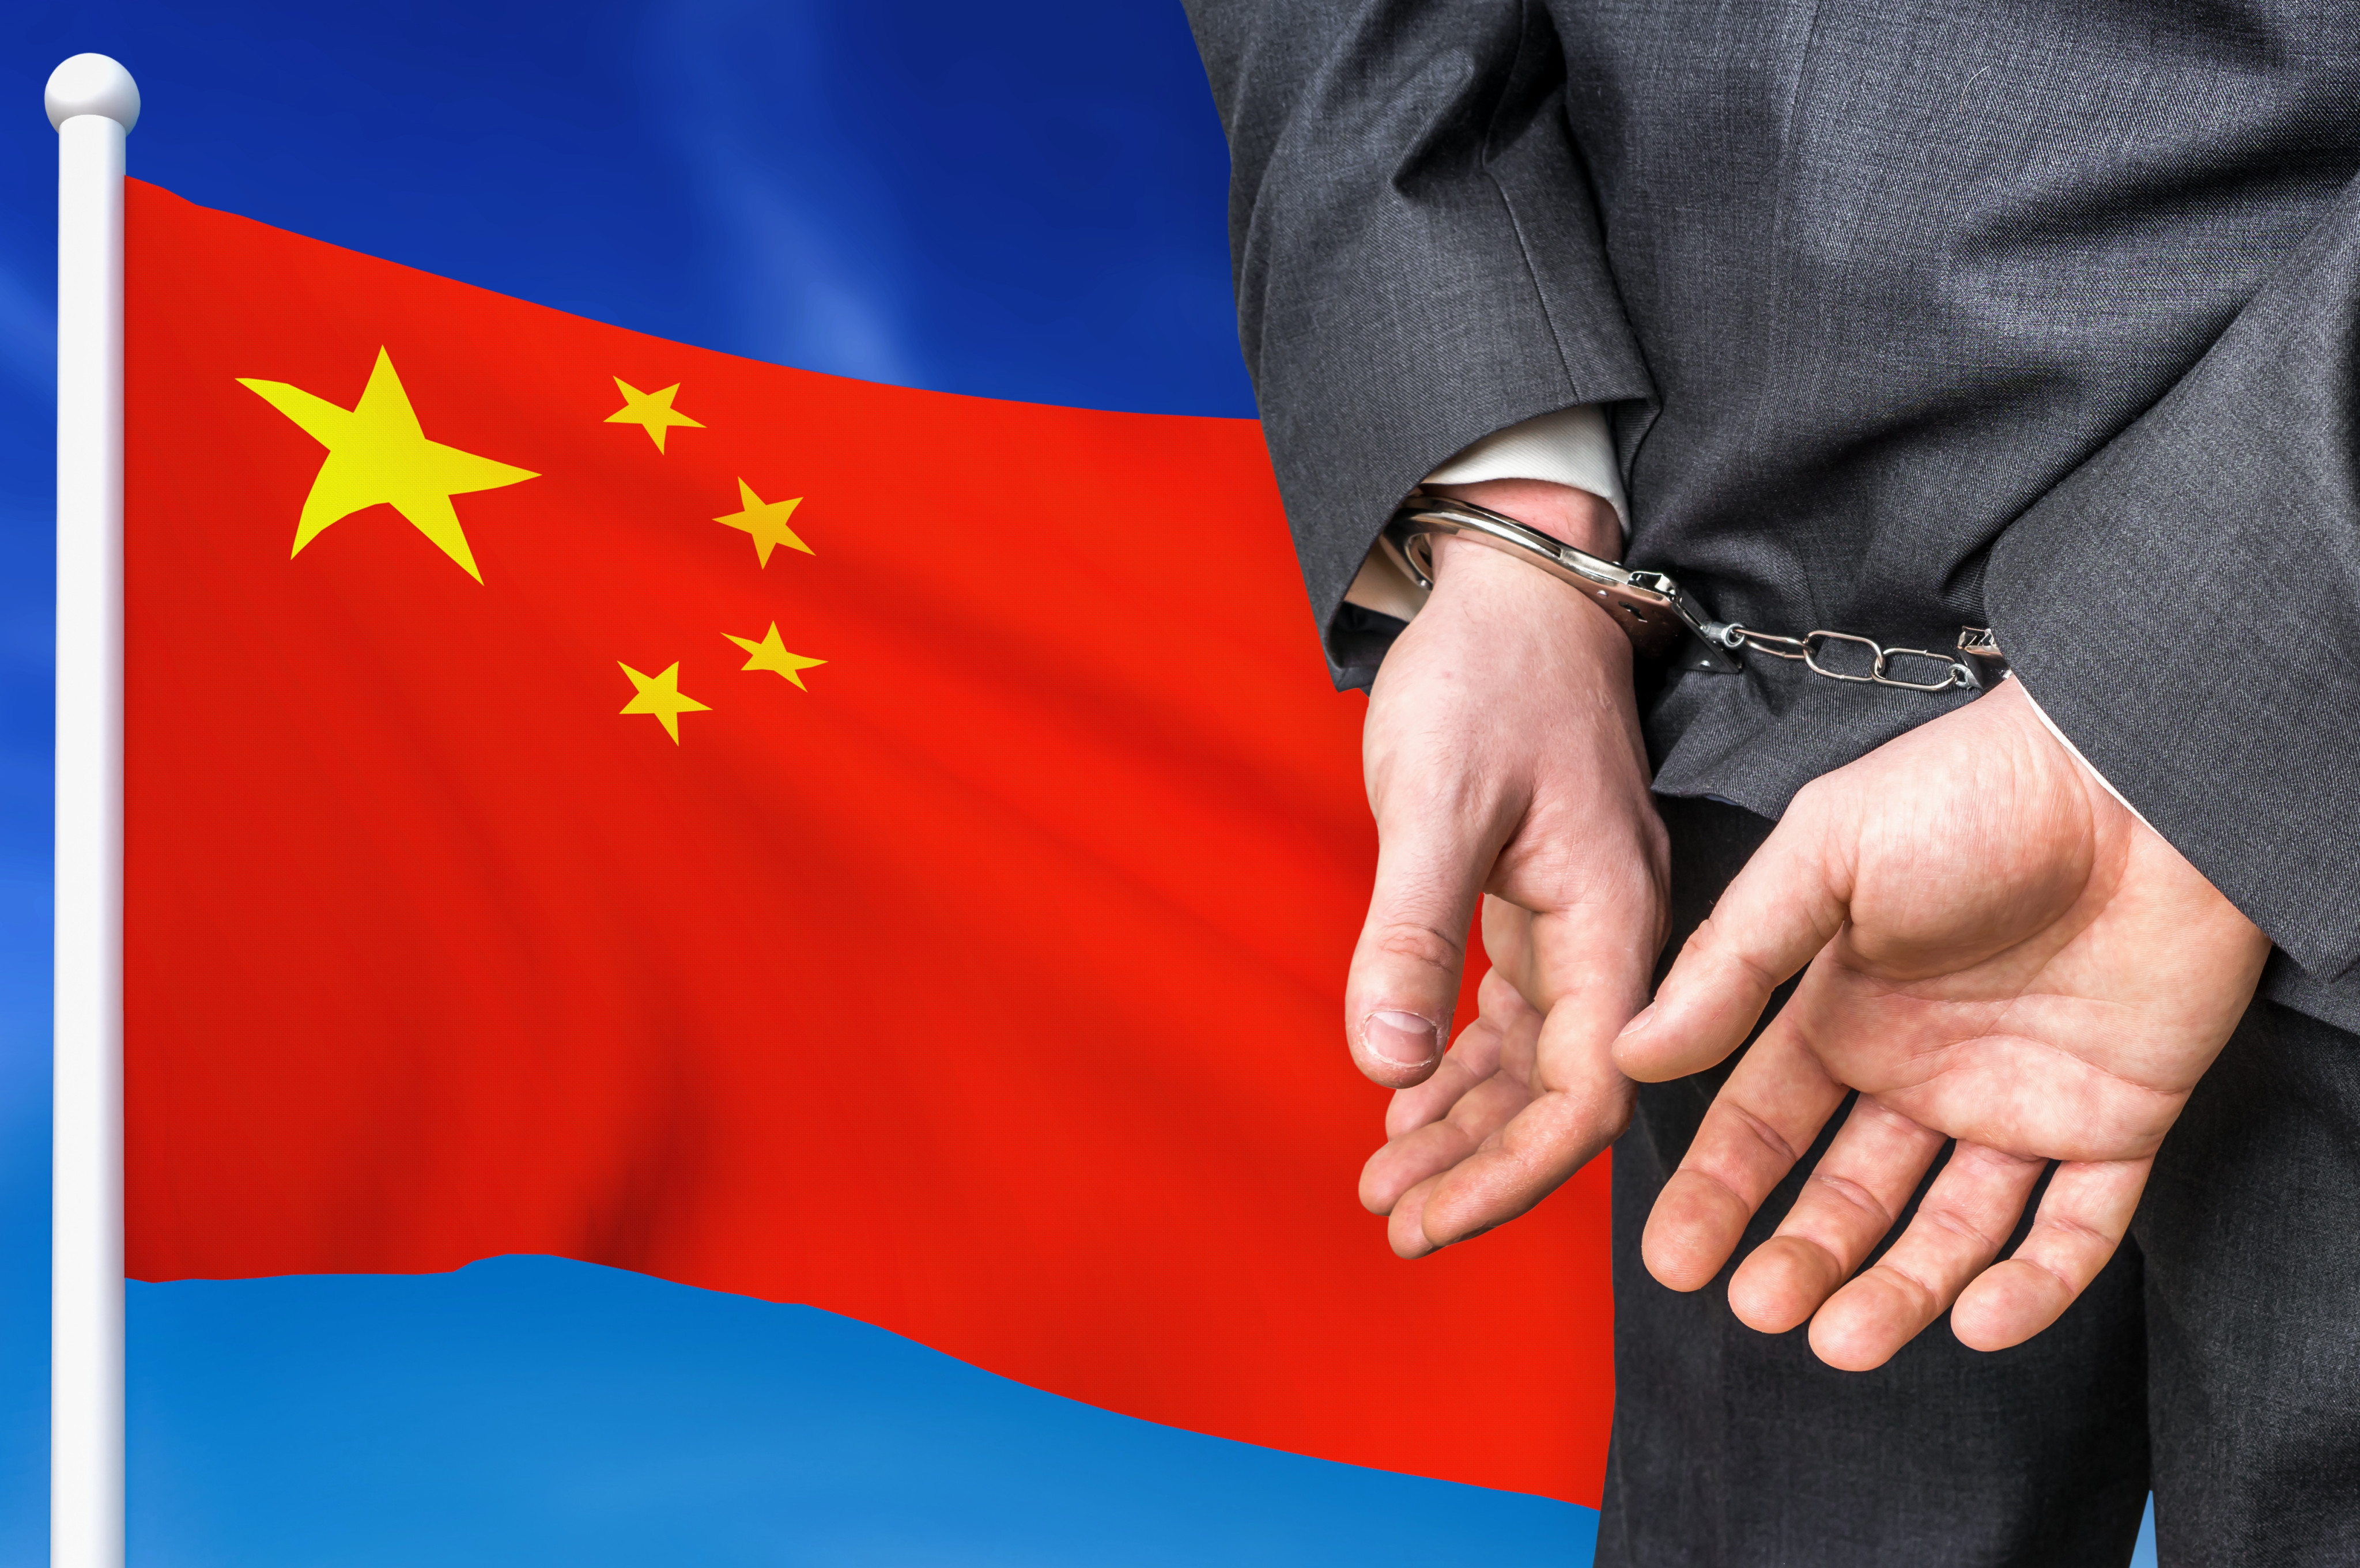 More than 160 hospital bosses and secretaries across China have been netted in an anti-corruption drive, with more heads expected to roll. Photo: Shutterstock